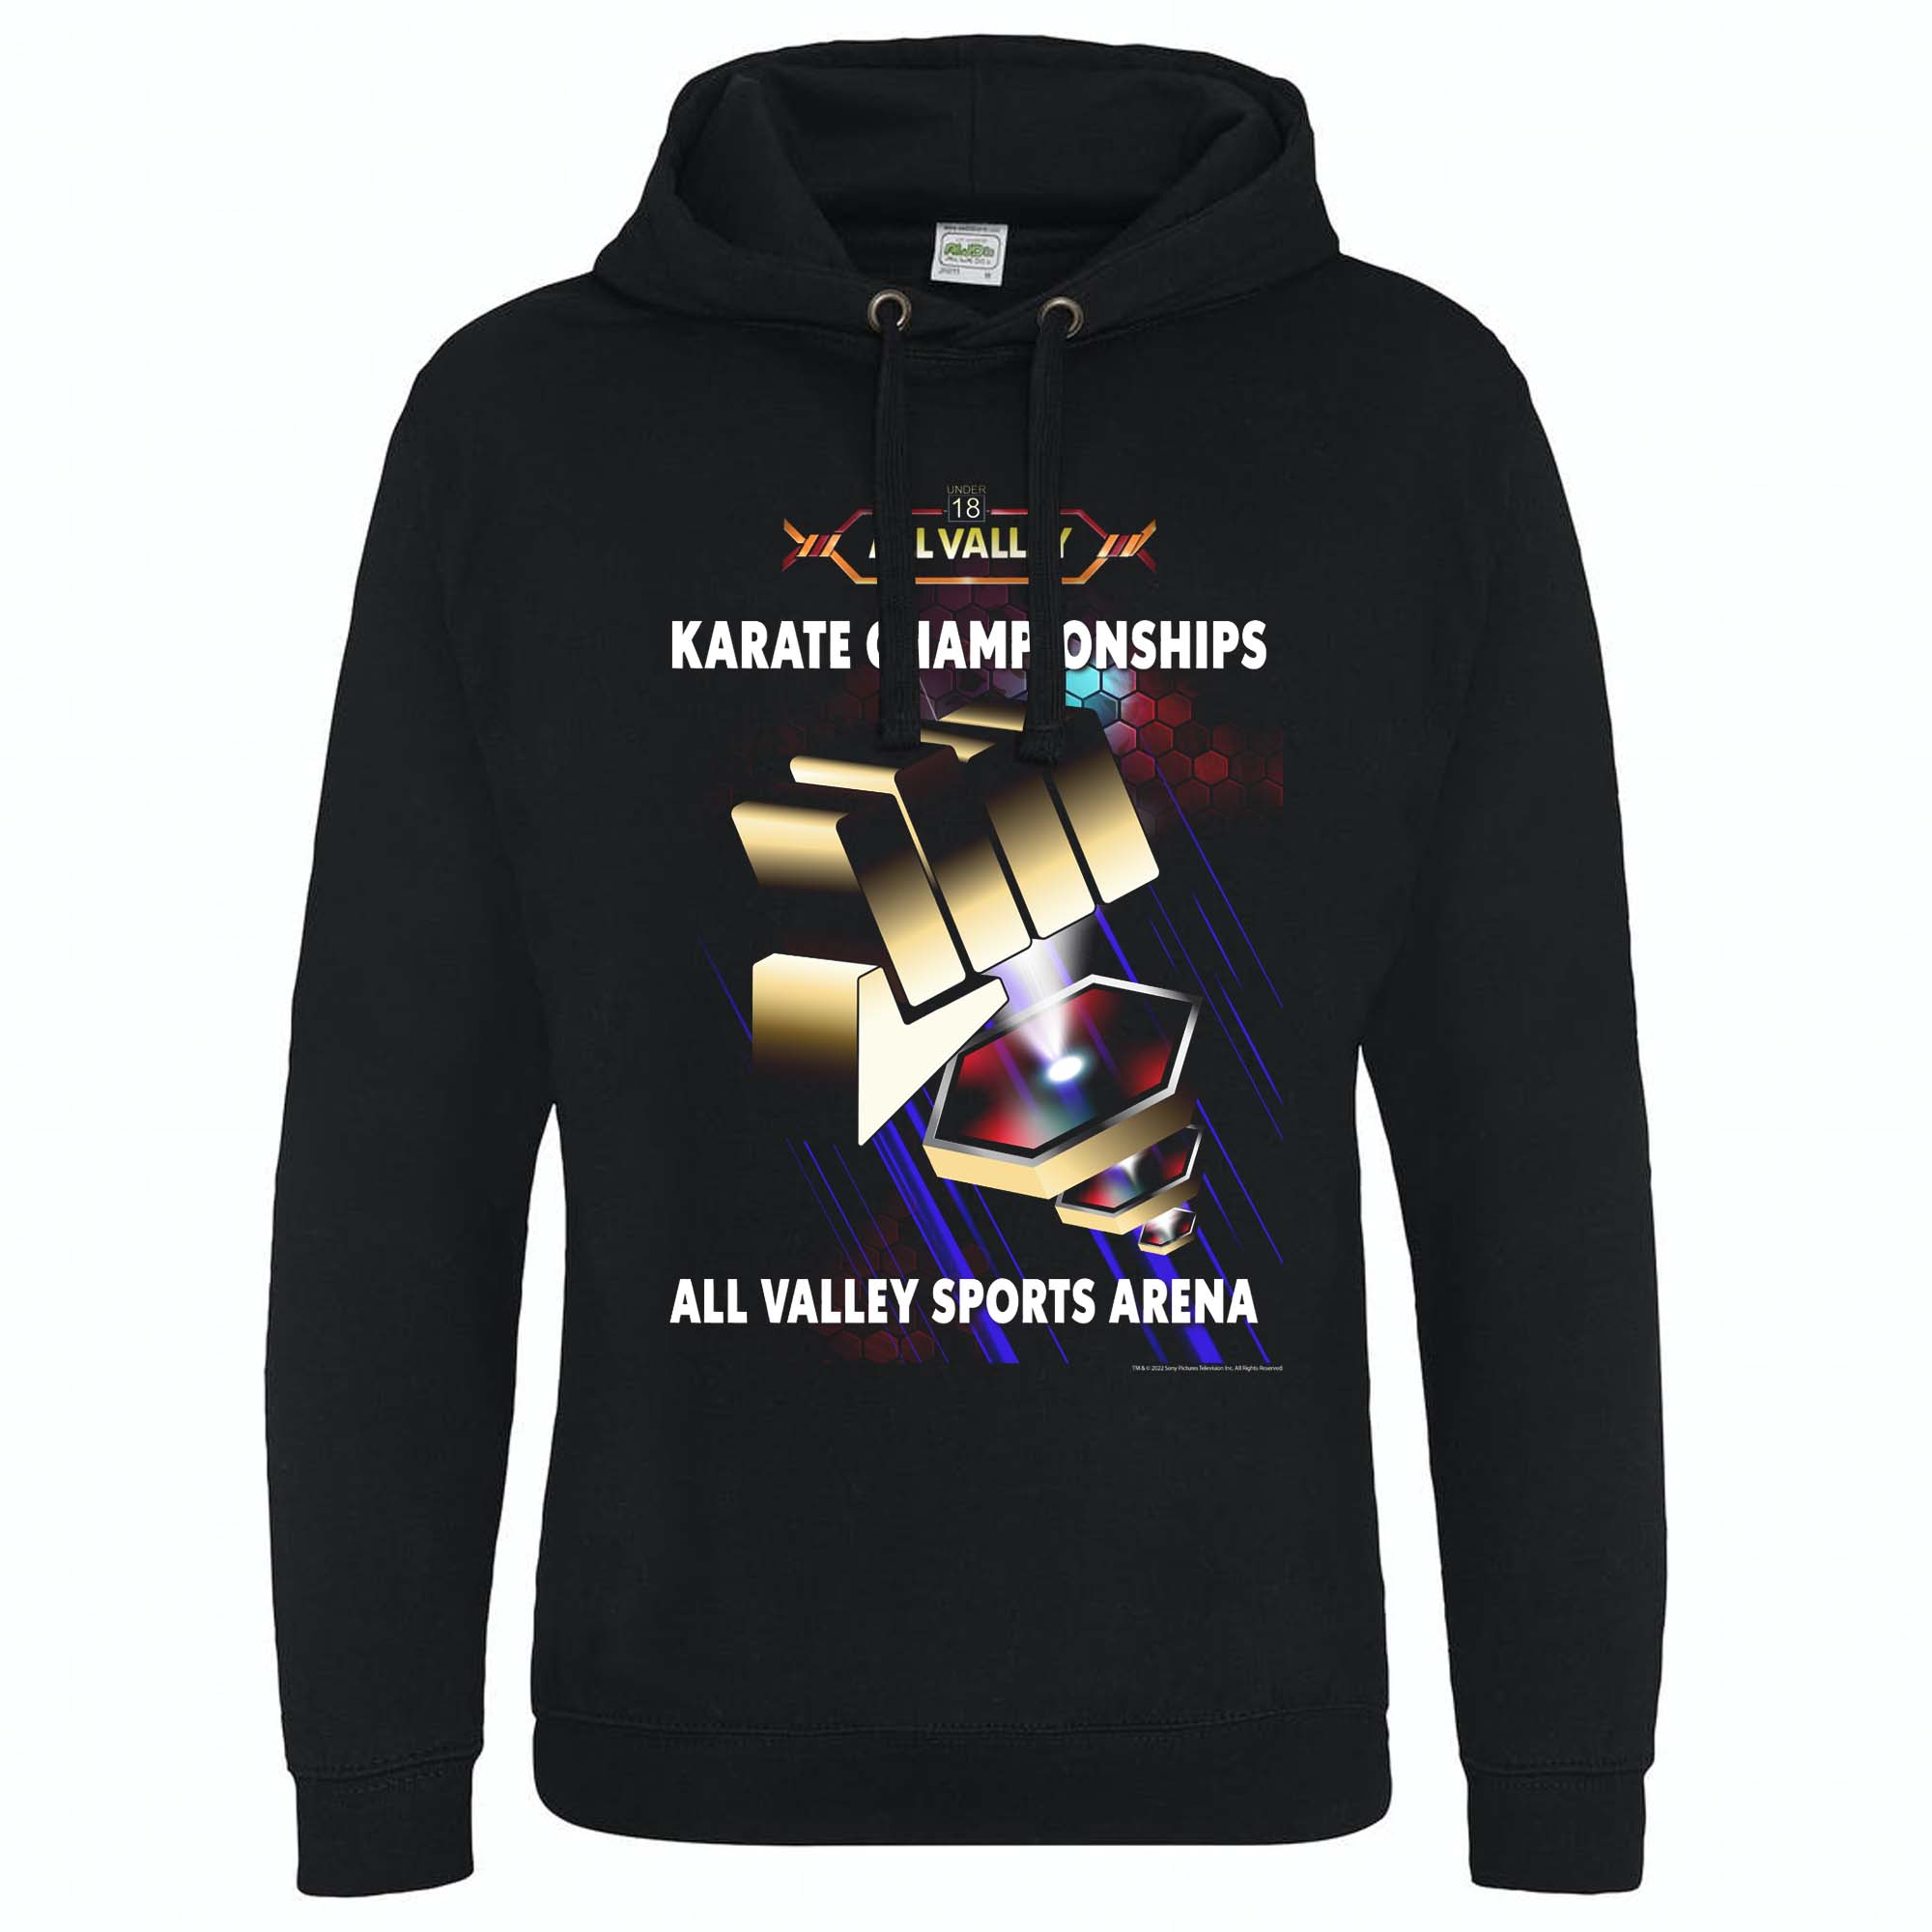 All Valley Championship 18 Event Black Unisex Hoodie